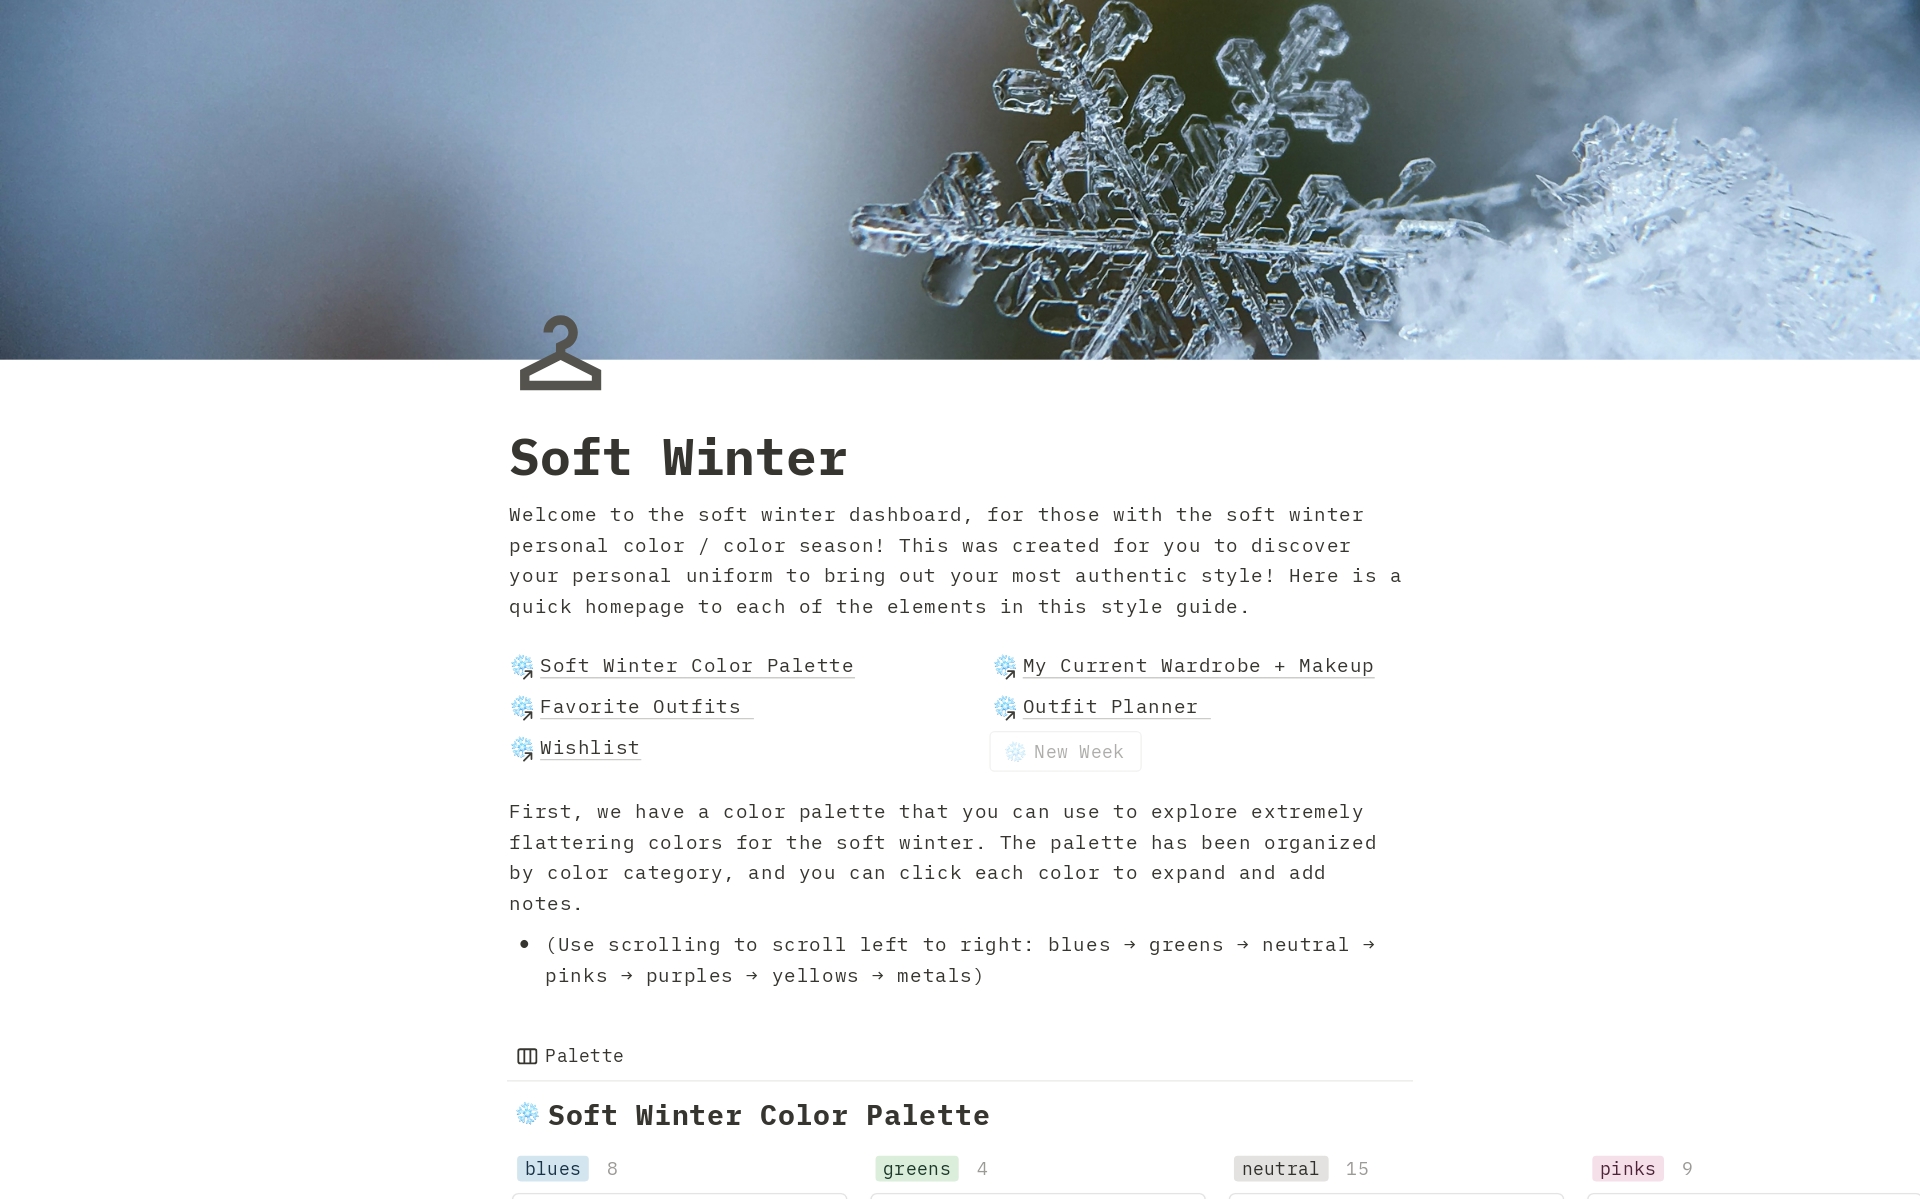 Are you a soft winter according to seasonal color analysis? Revolutionize your style with this customizable seasonal color style guide: organize your wardrobe, makeup, and wishlist to align with your most flattering colors.